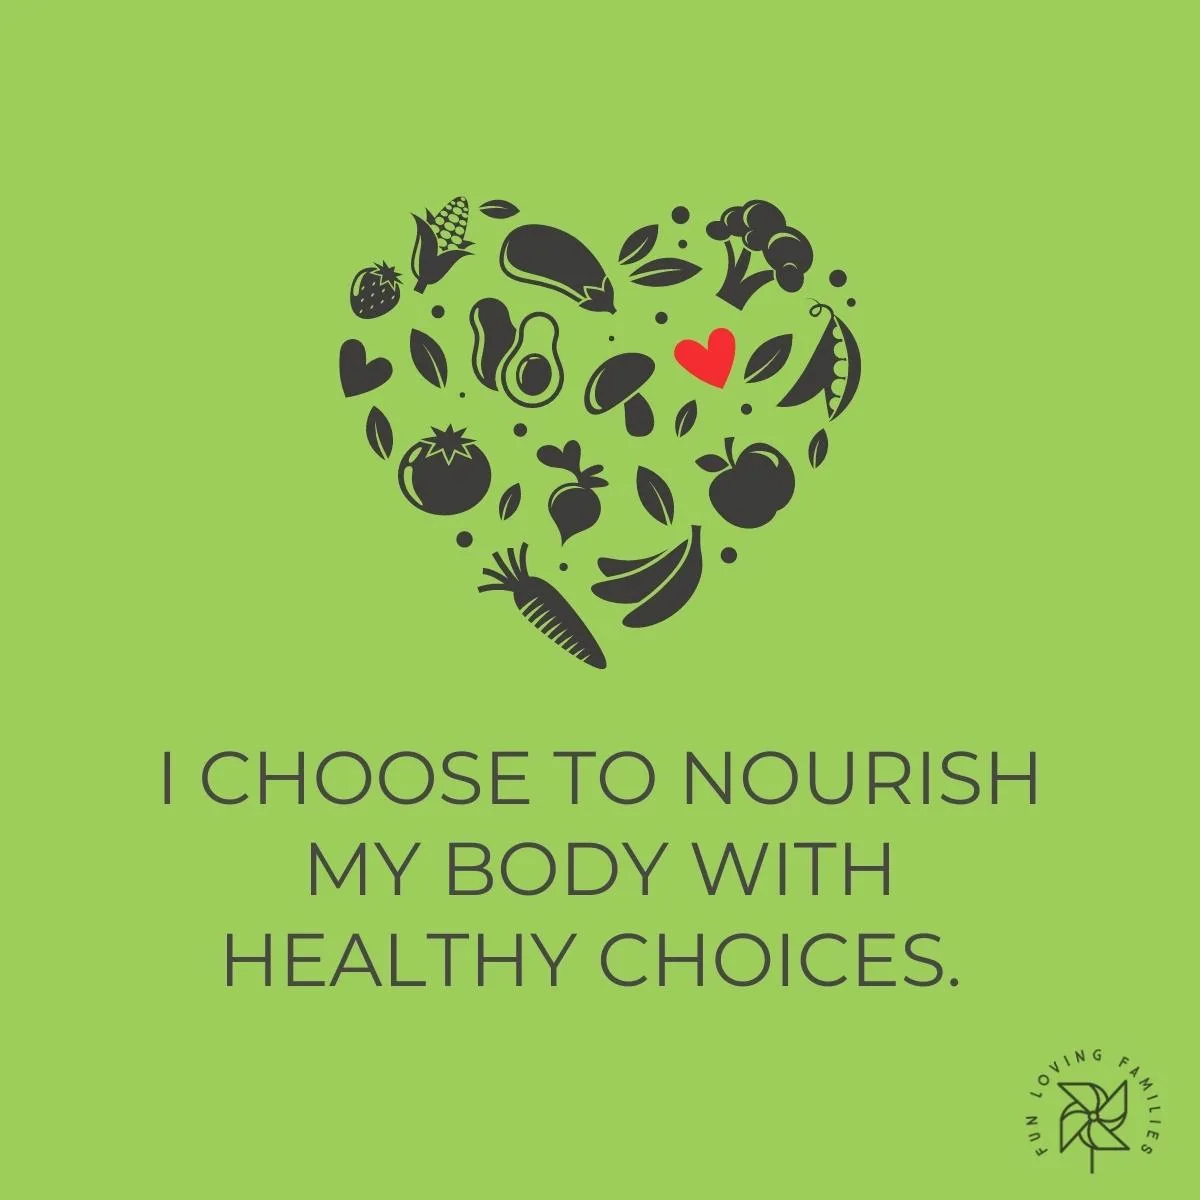 I choose to nourish my body with healthy choices affirmation